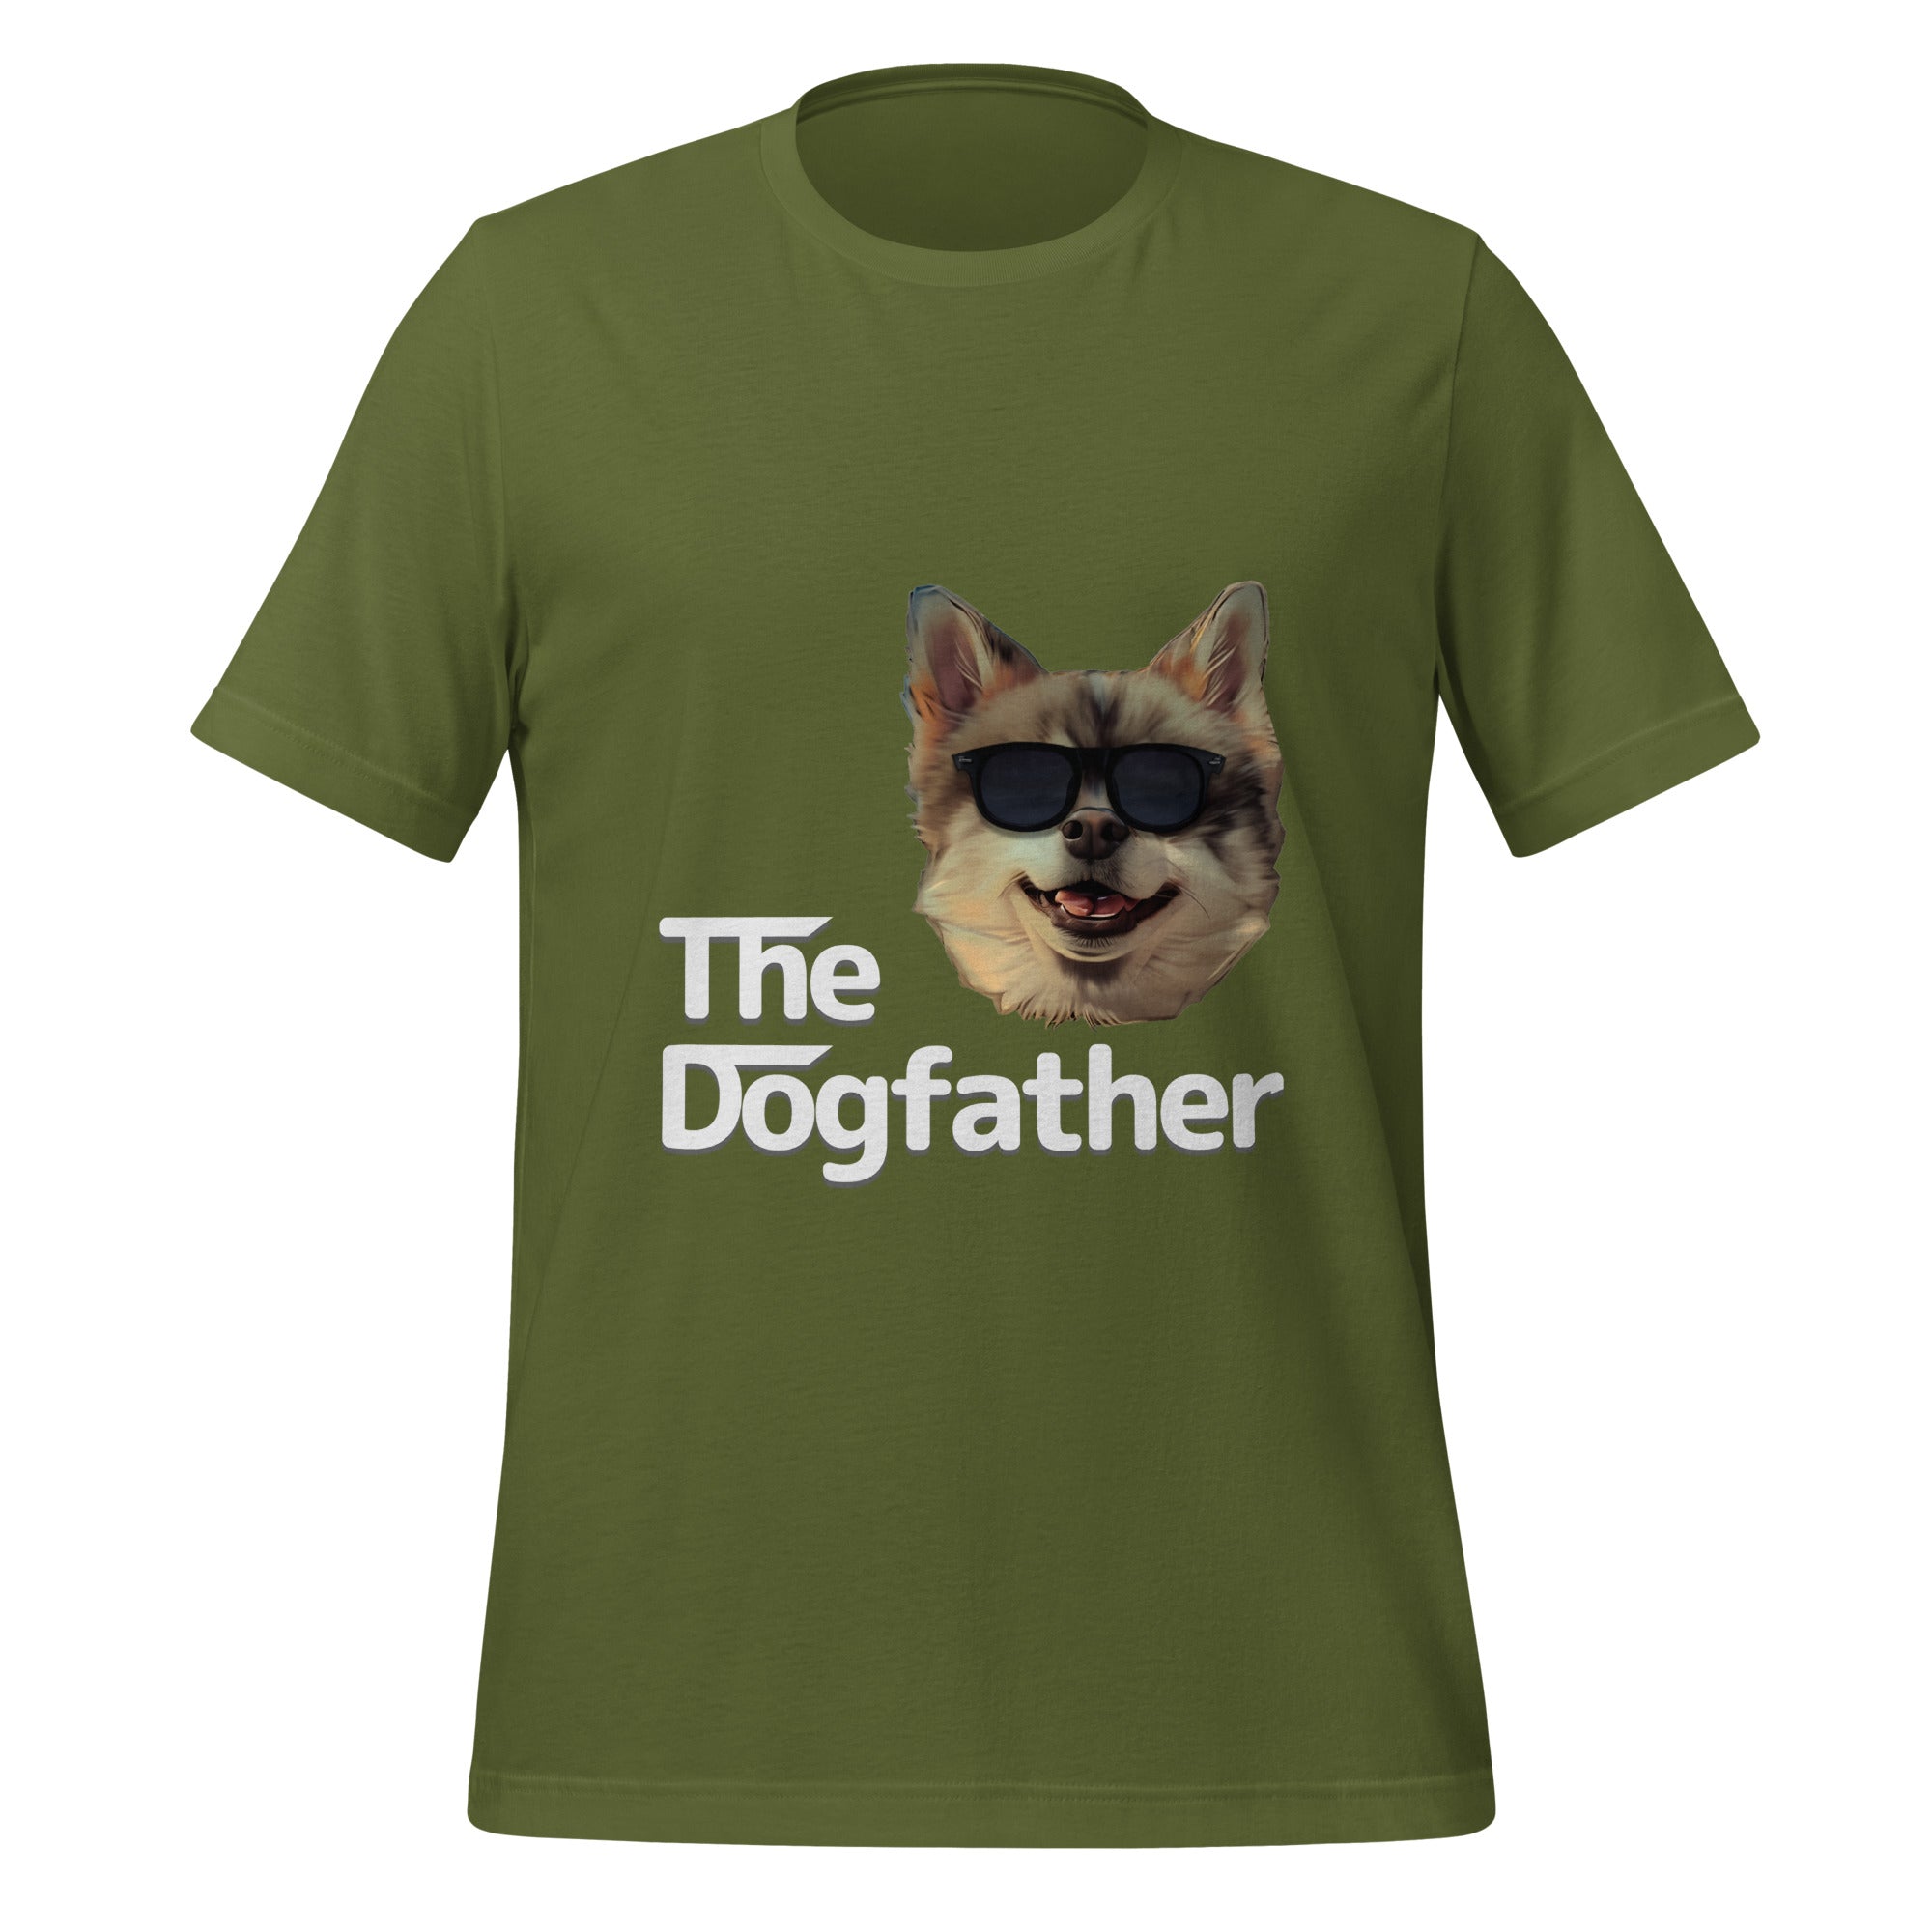 The Dogfather Dark Color Tee